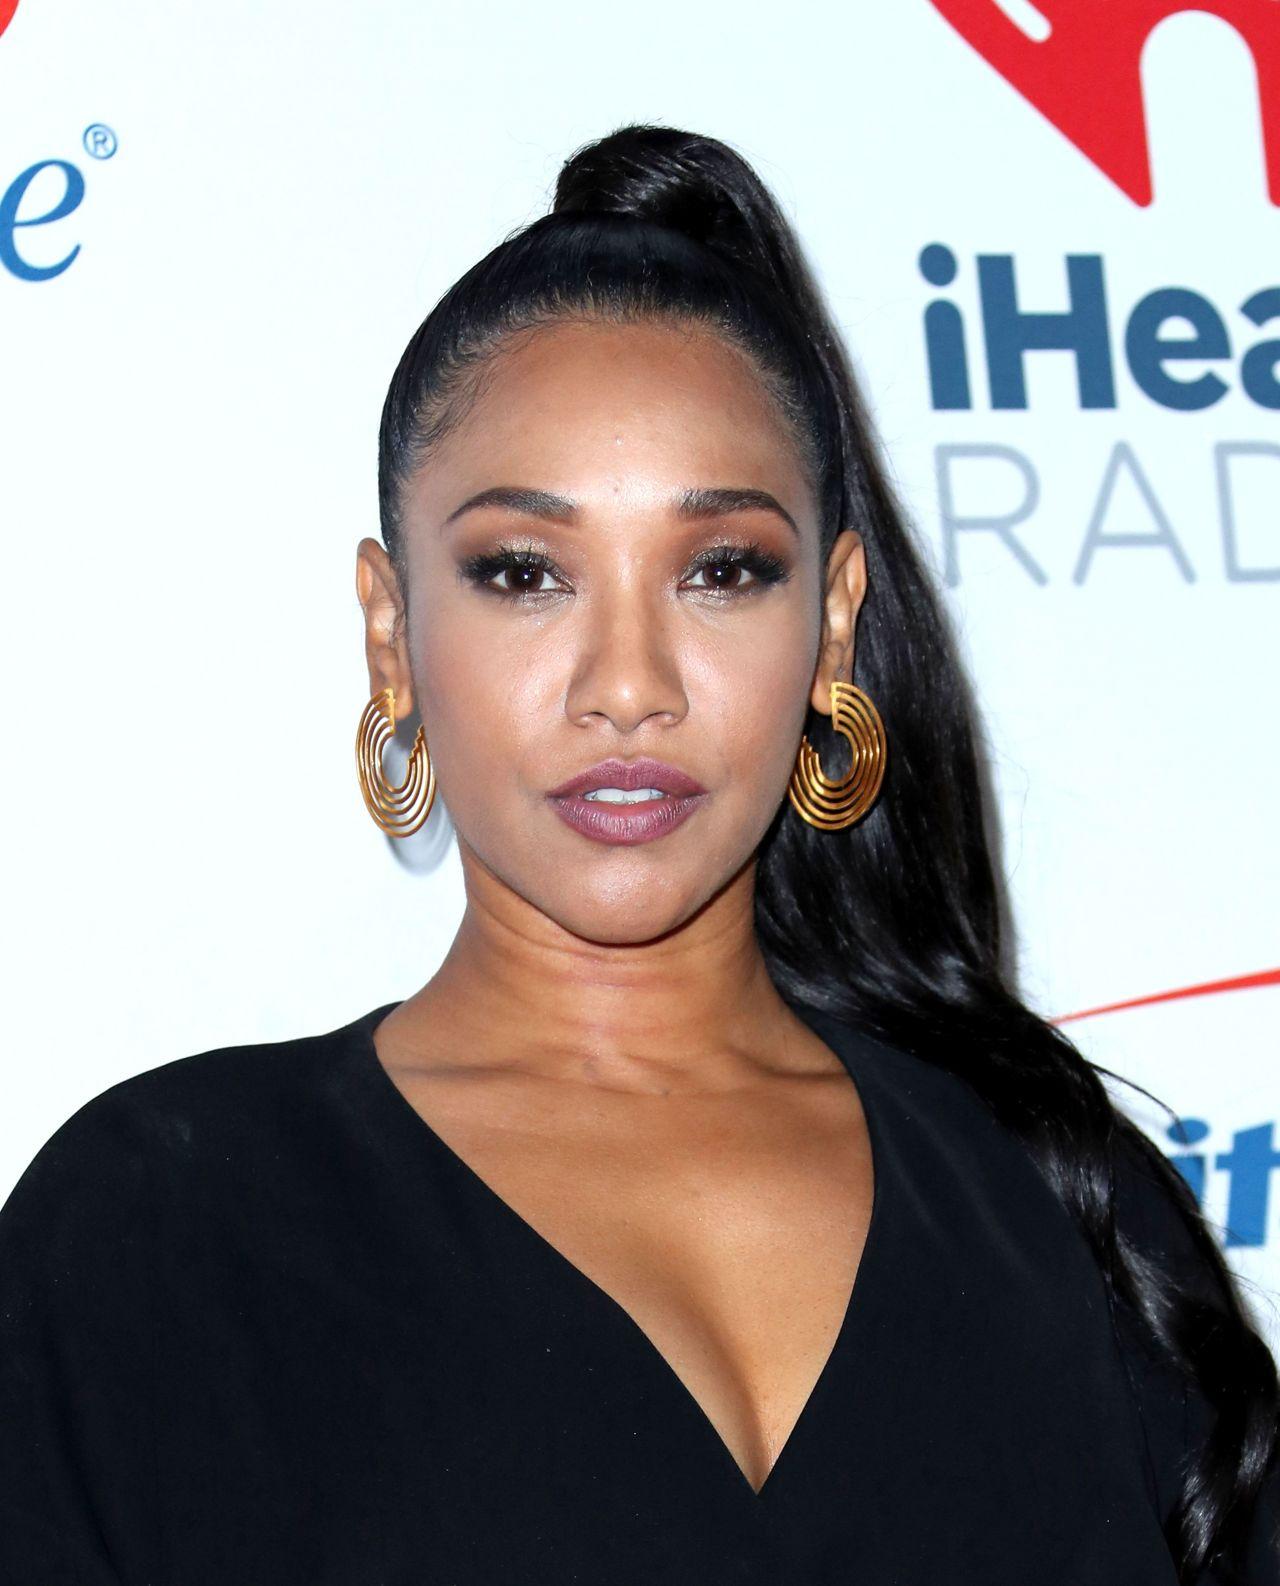 70+ Hot Pictures Of Candice Patton Who Plays Iris West In Flash TV Series 372